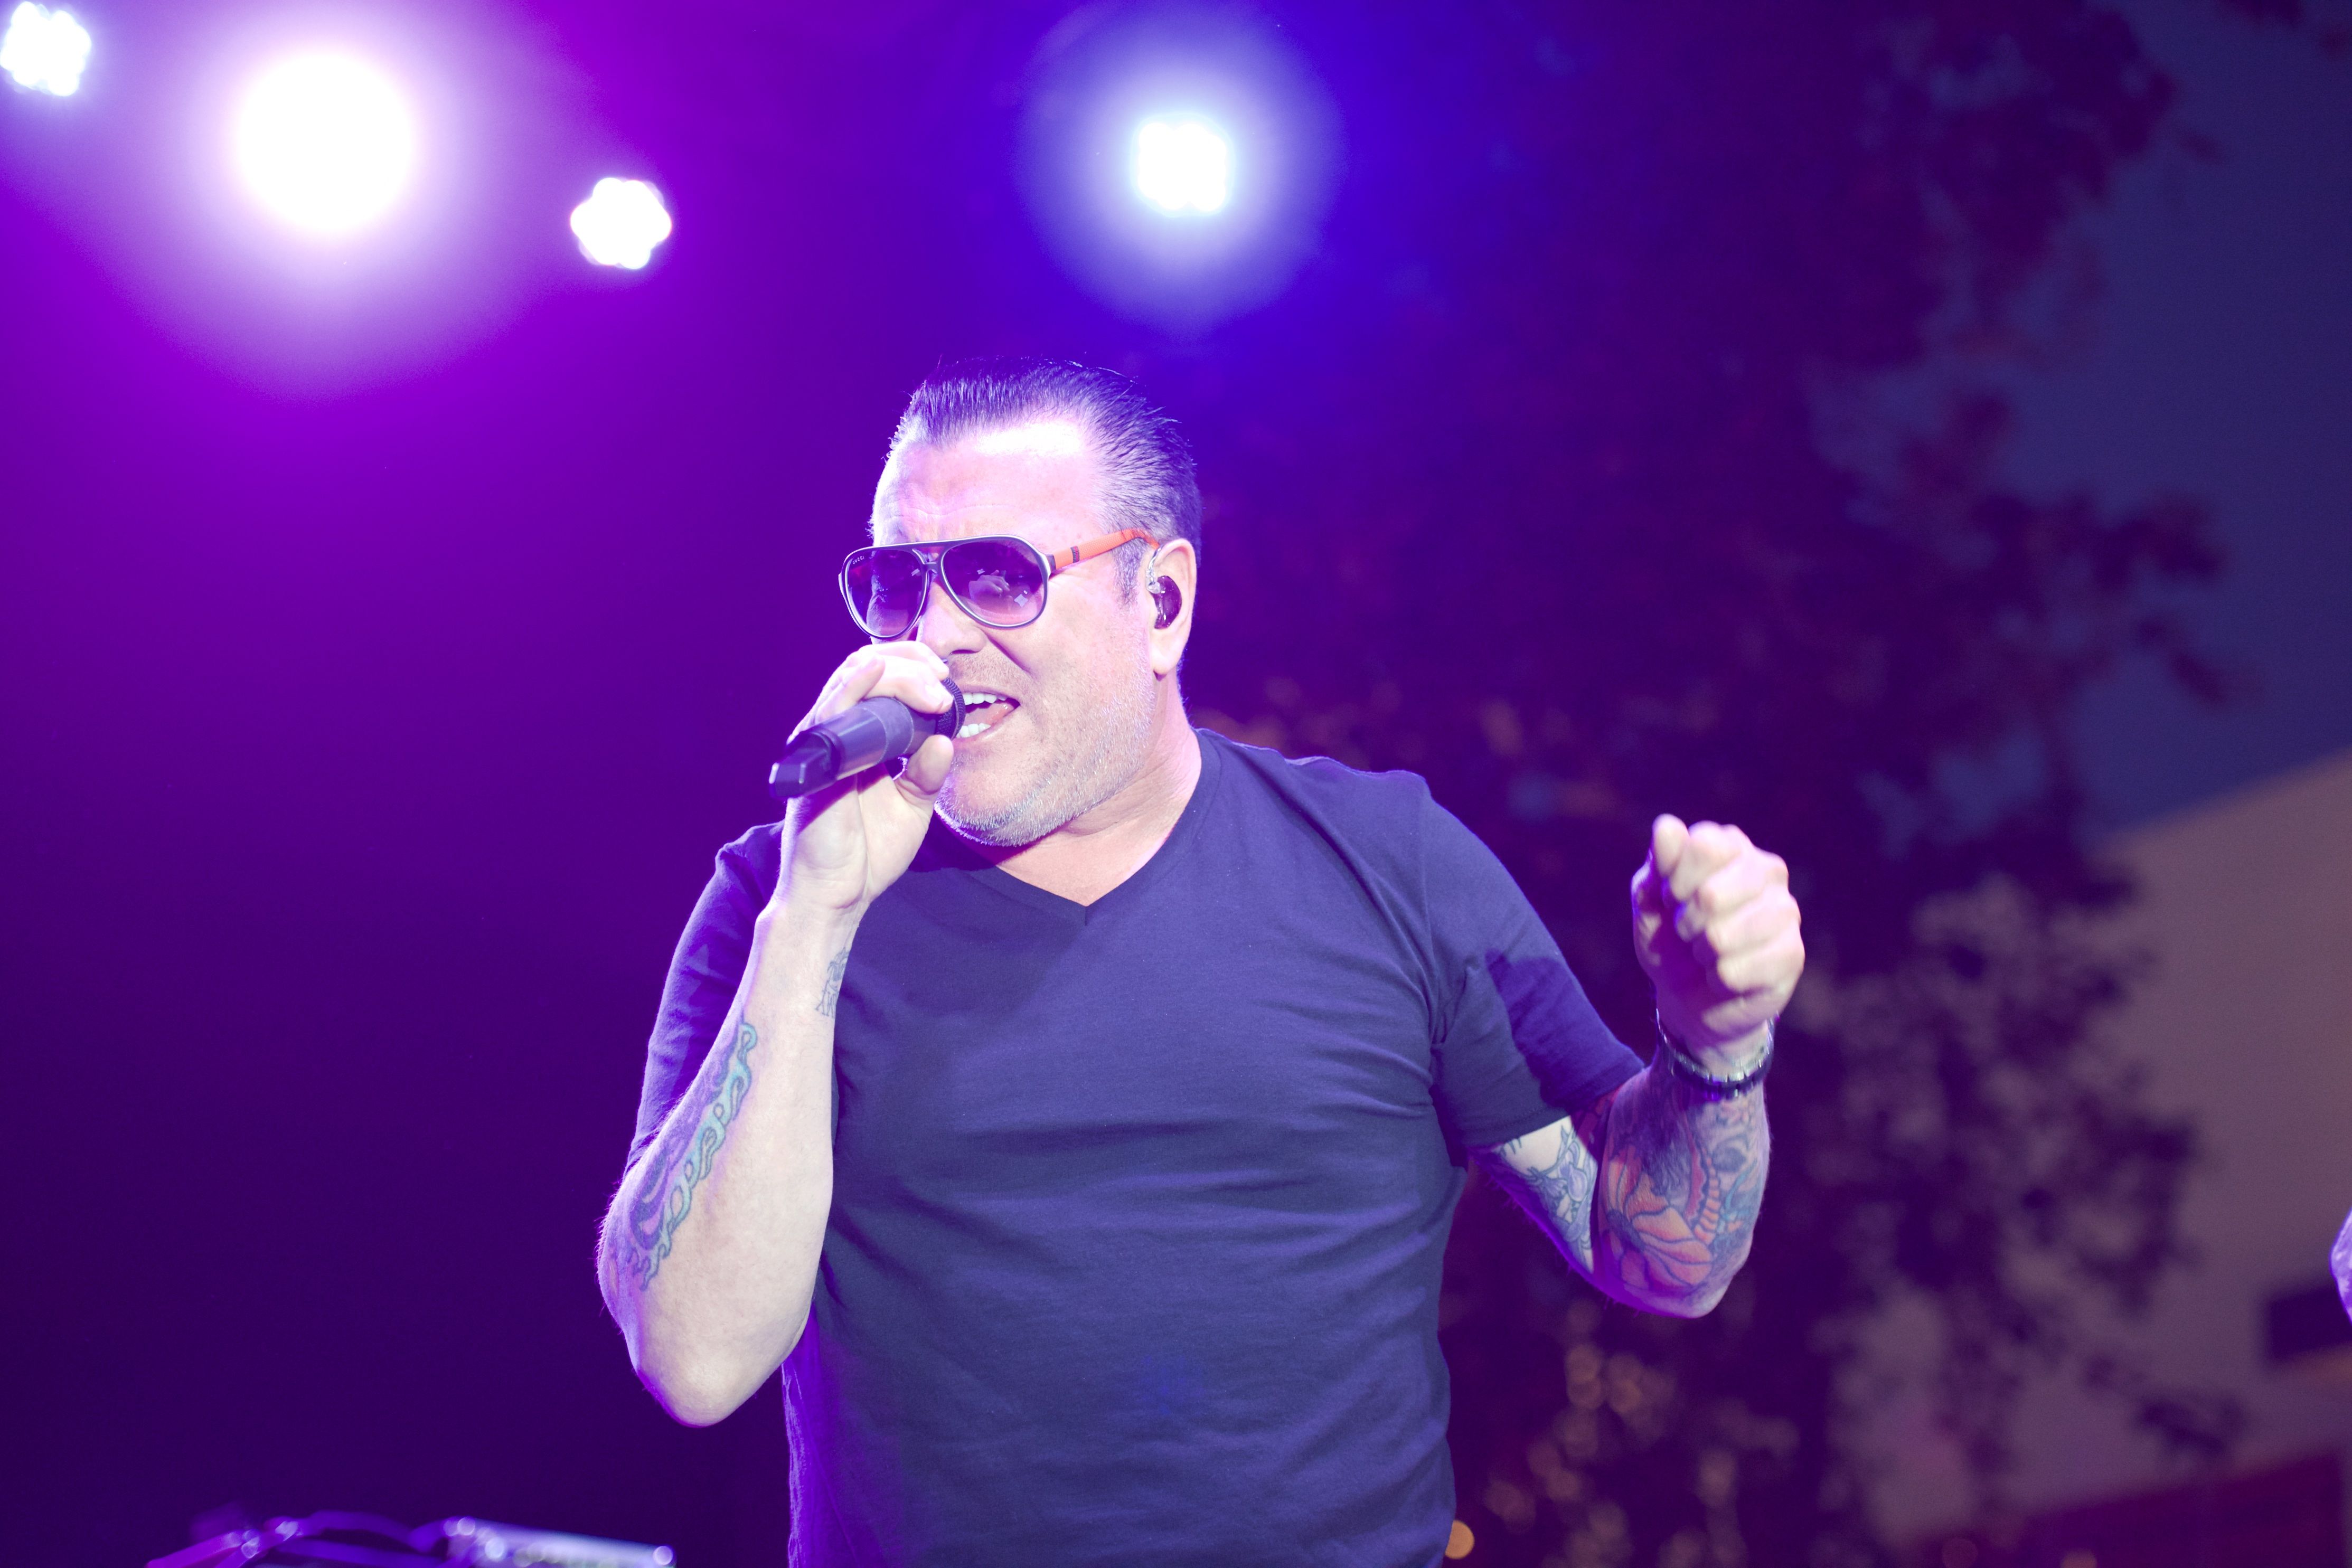 Is Smash Mouth Breaking Up? The Lead Singer Left the Band